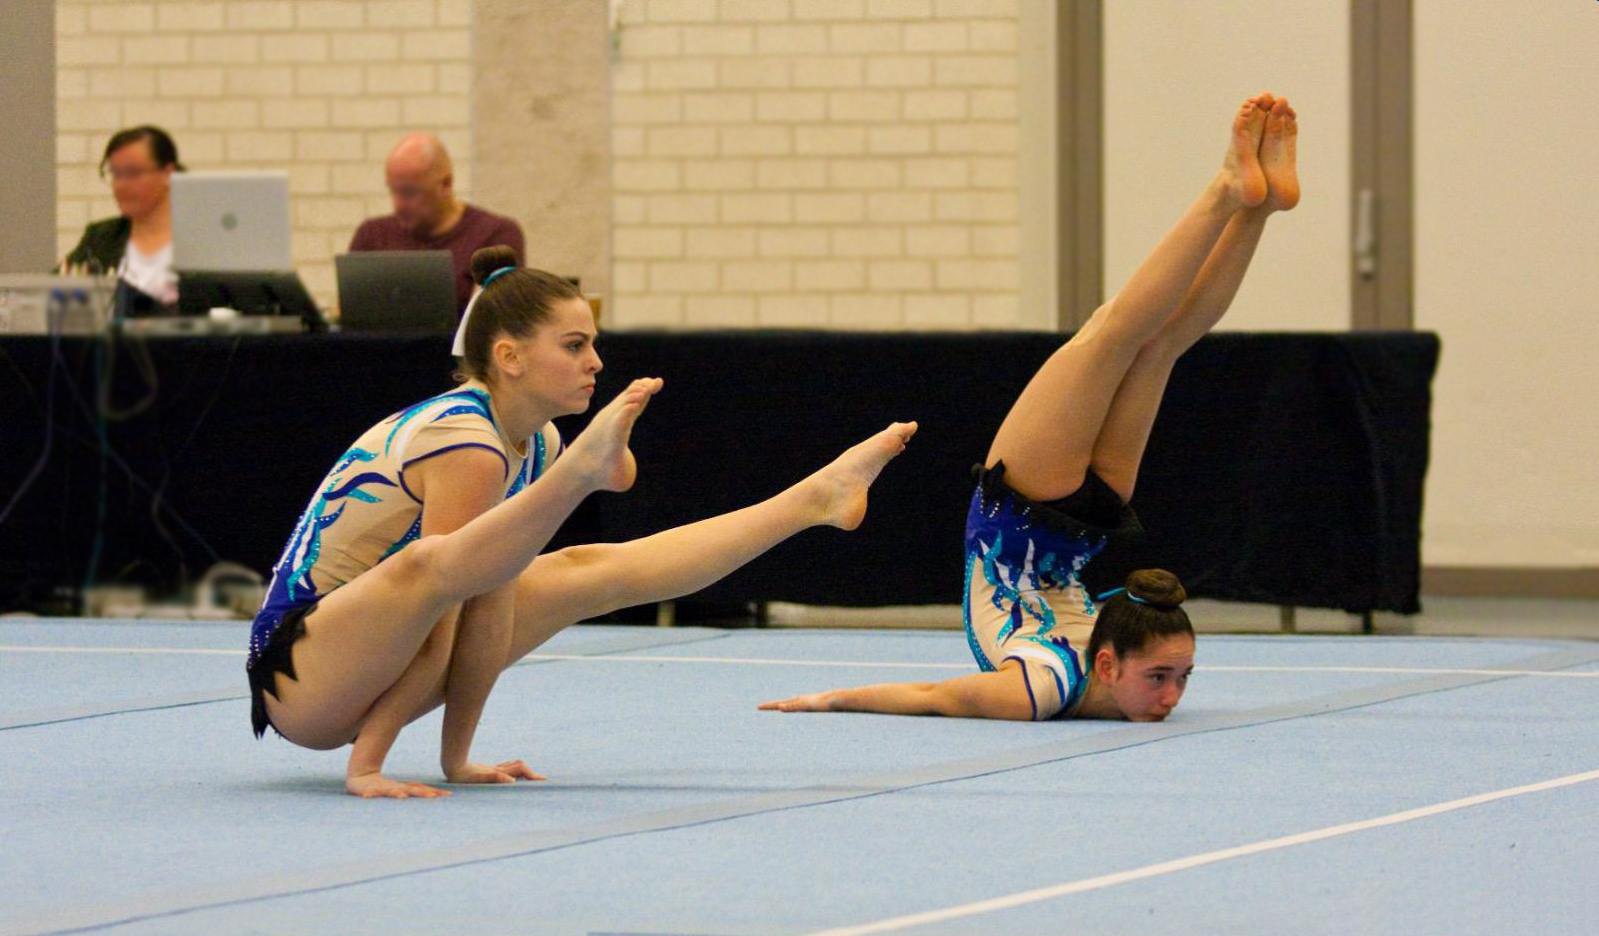 Herinnering open les acrogym